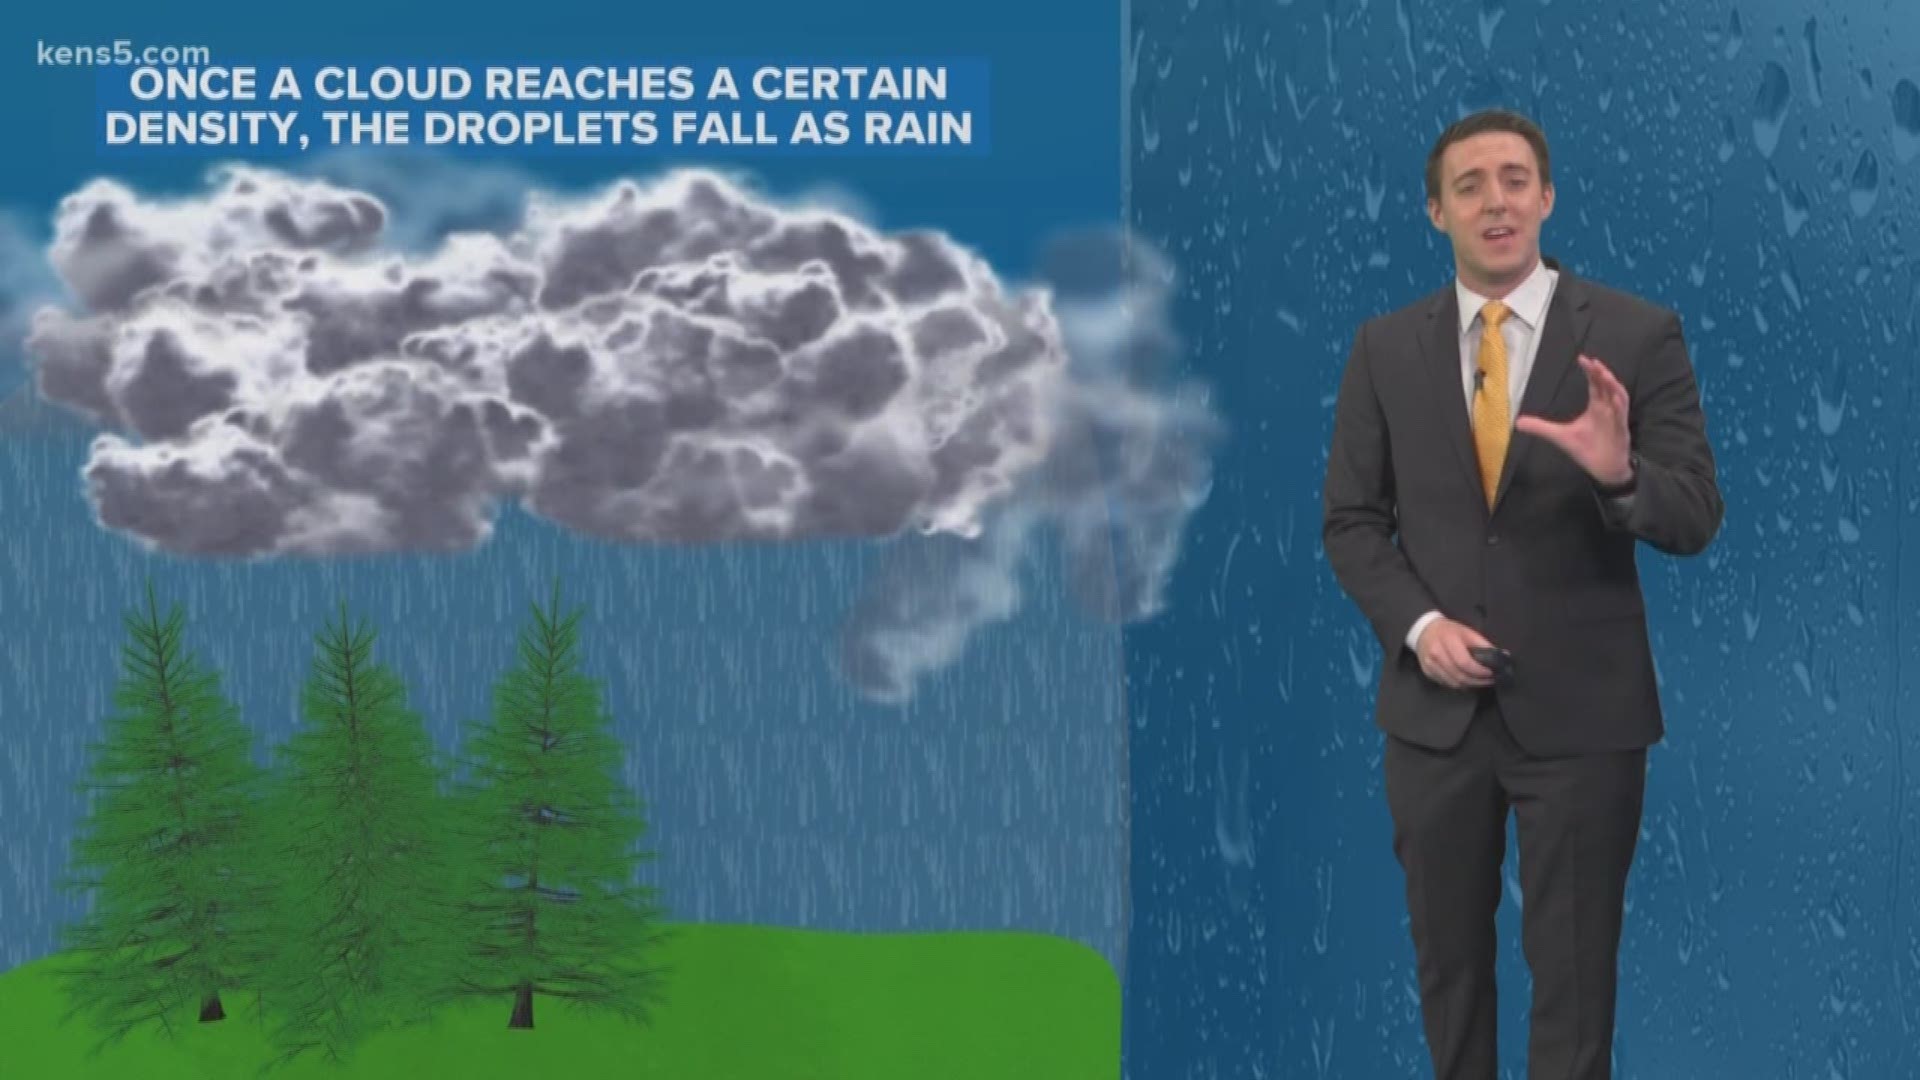 Rain is something that we see fairly often, but do you ever wonder how it forms?